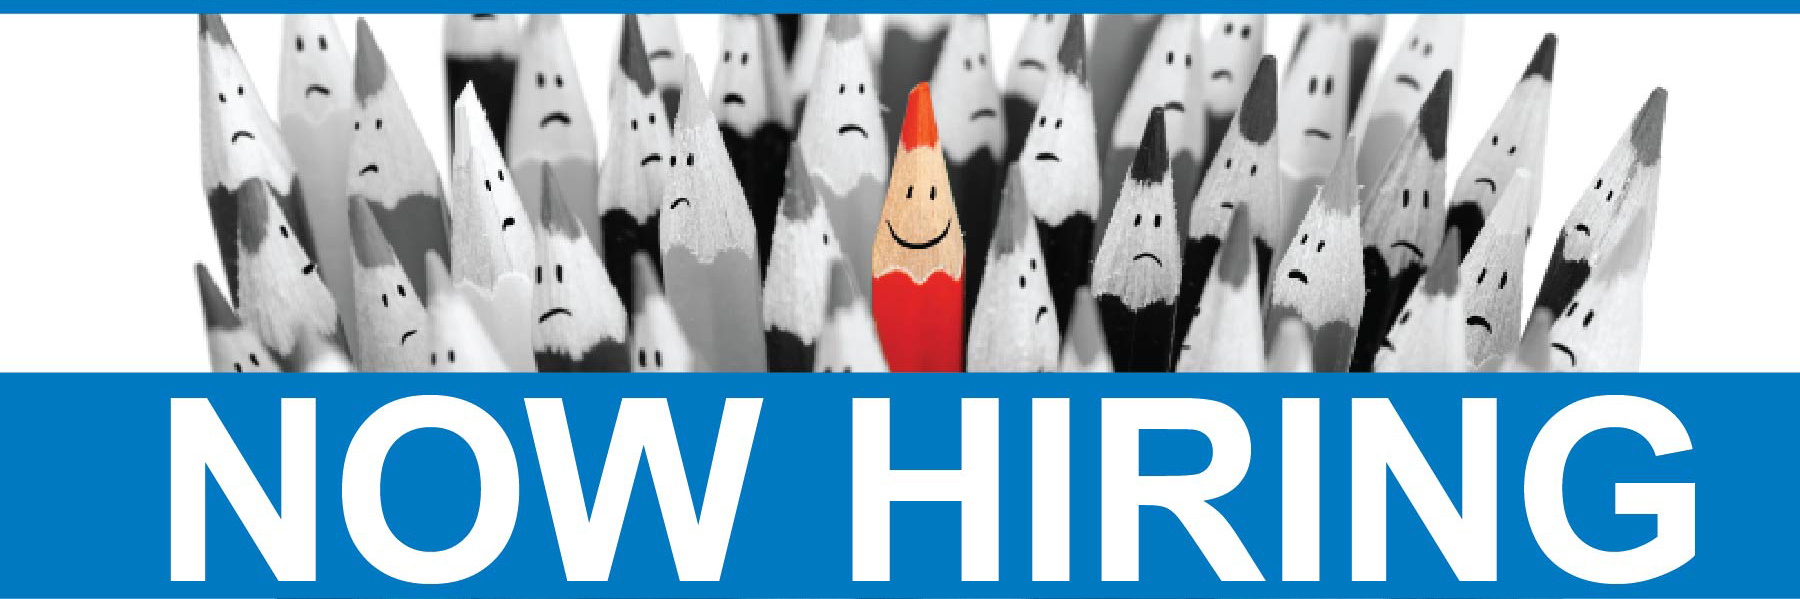 Now Hiring [group of gray pencils with one red pencil]